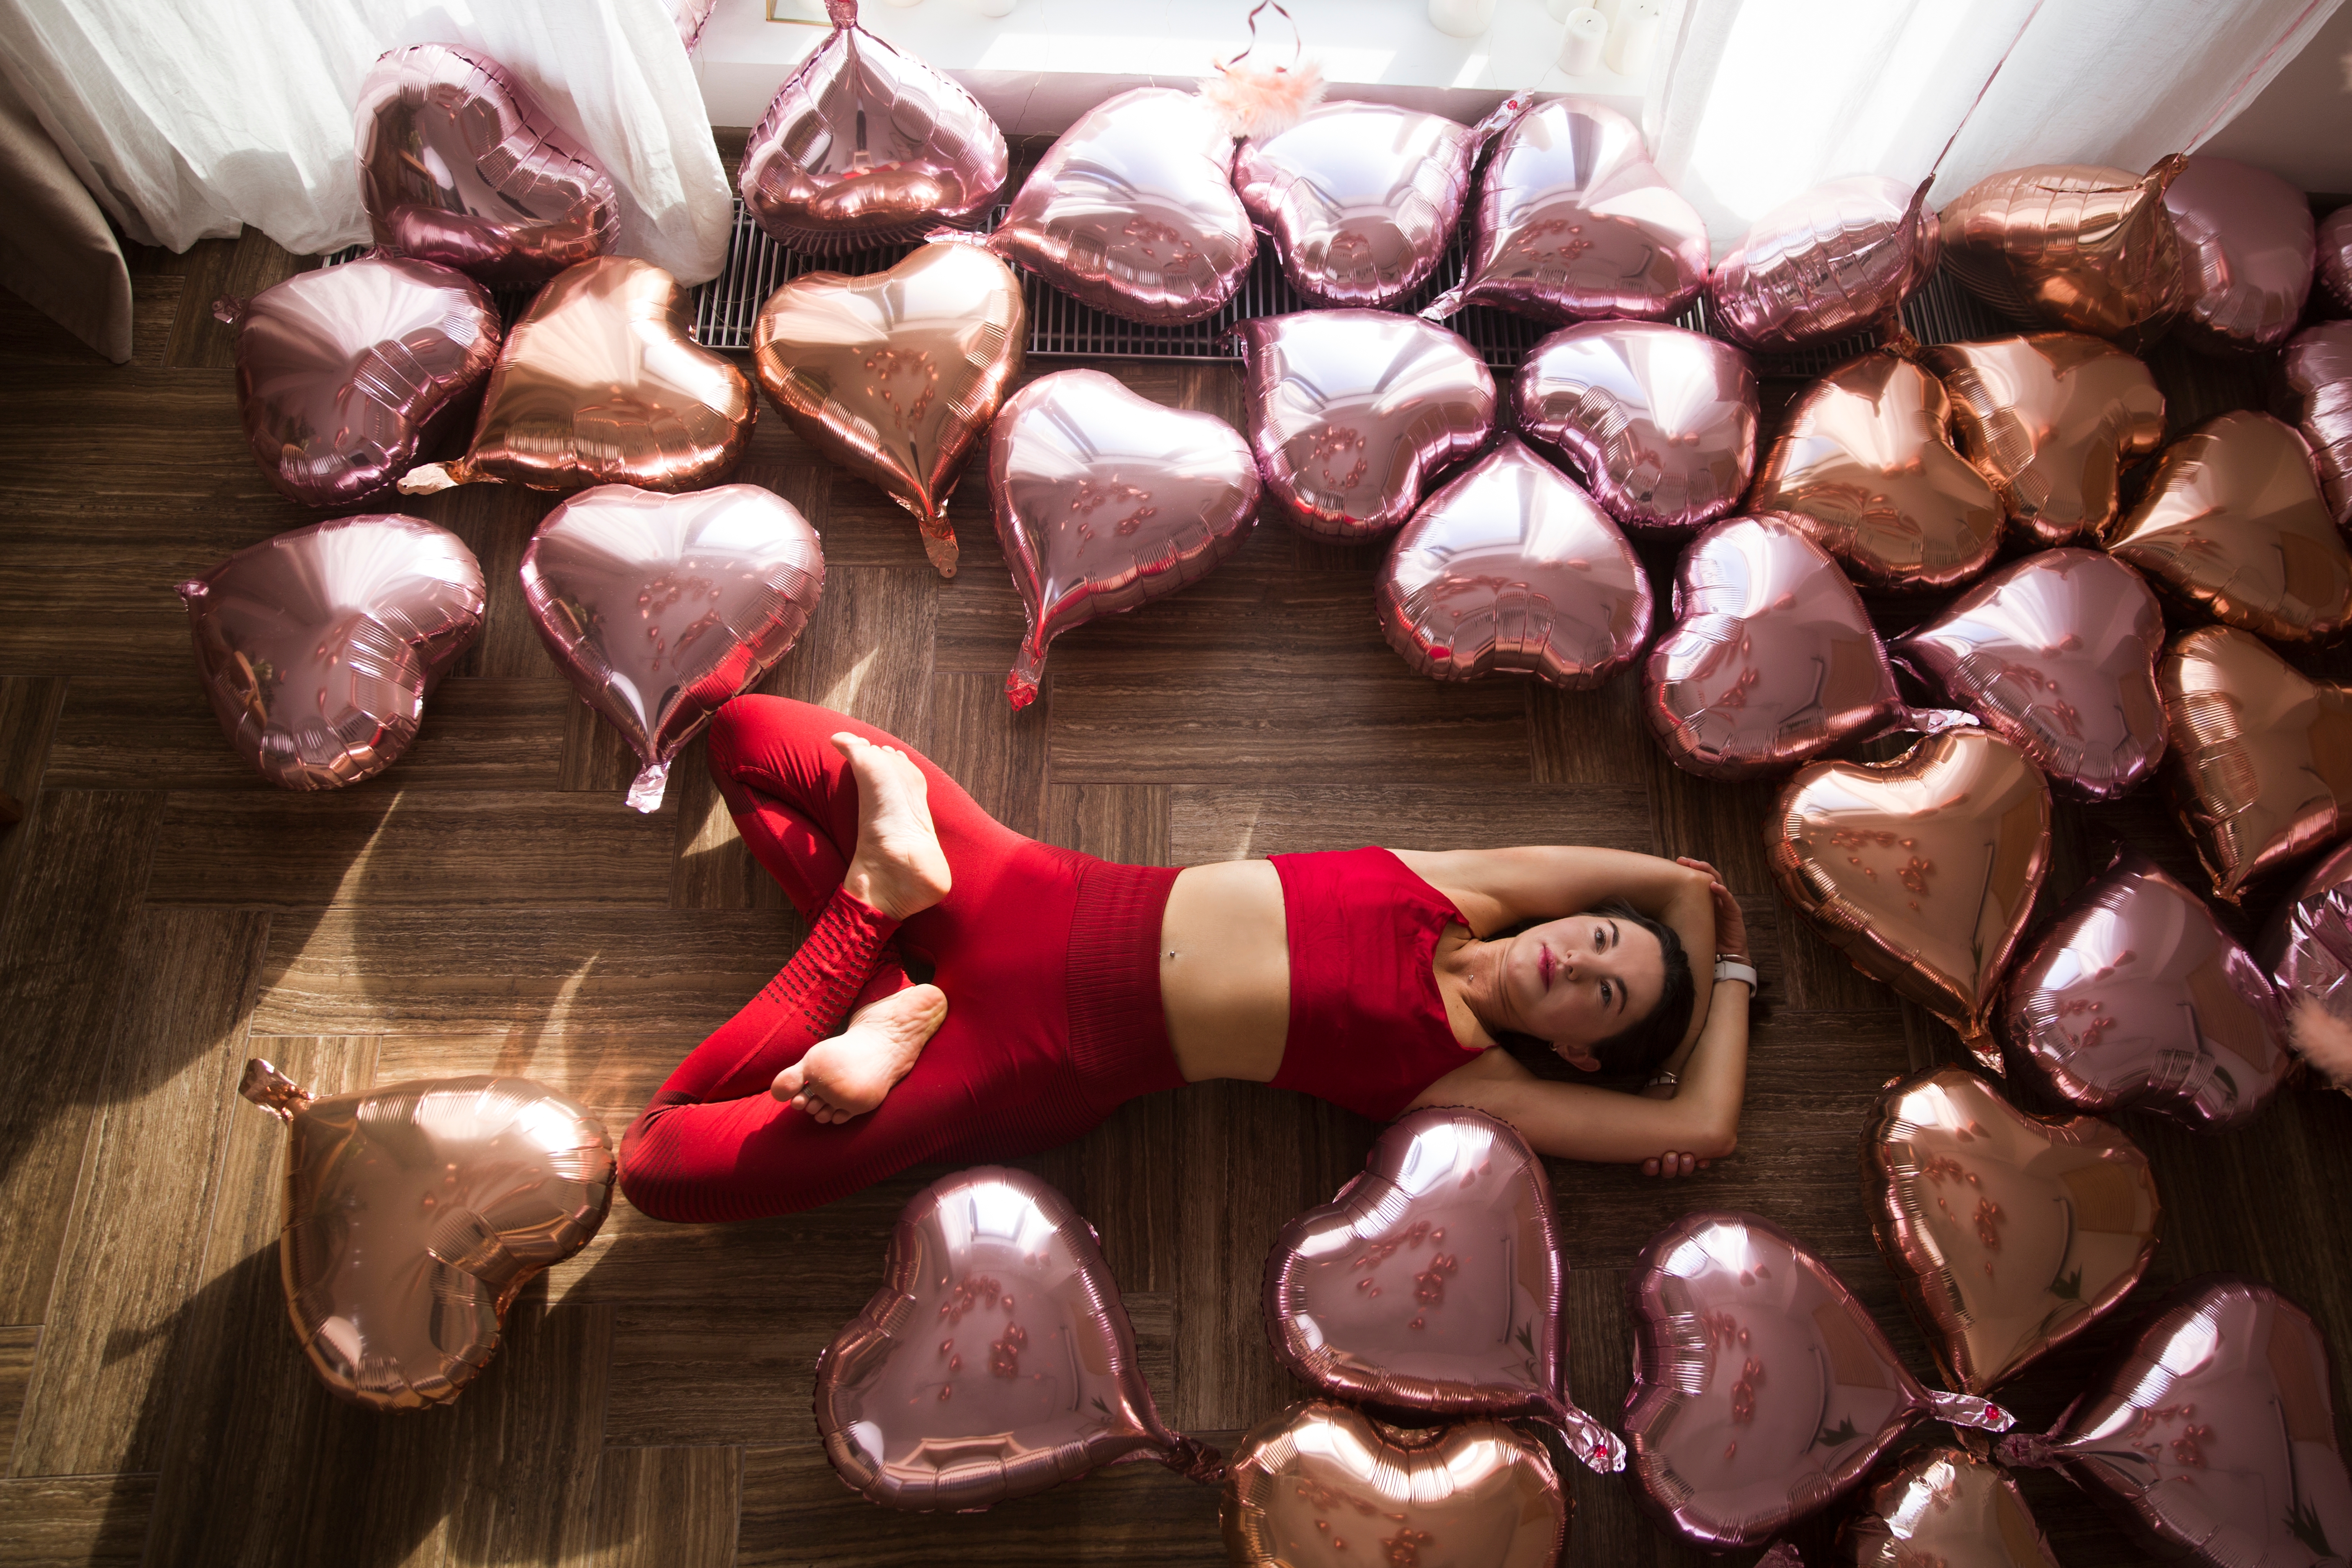 Someone lying on the floor surrounded by love heart balloons